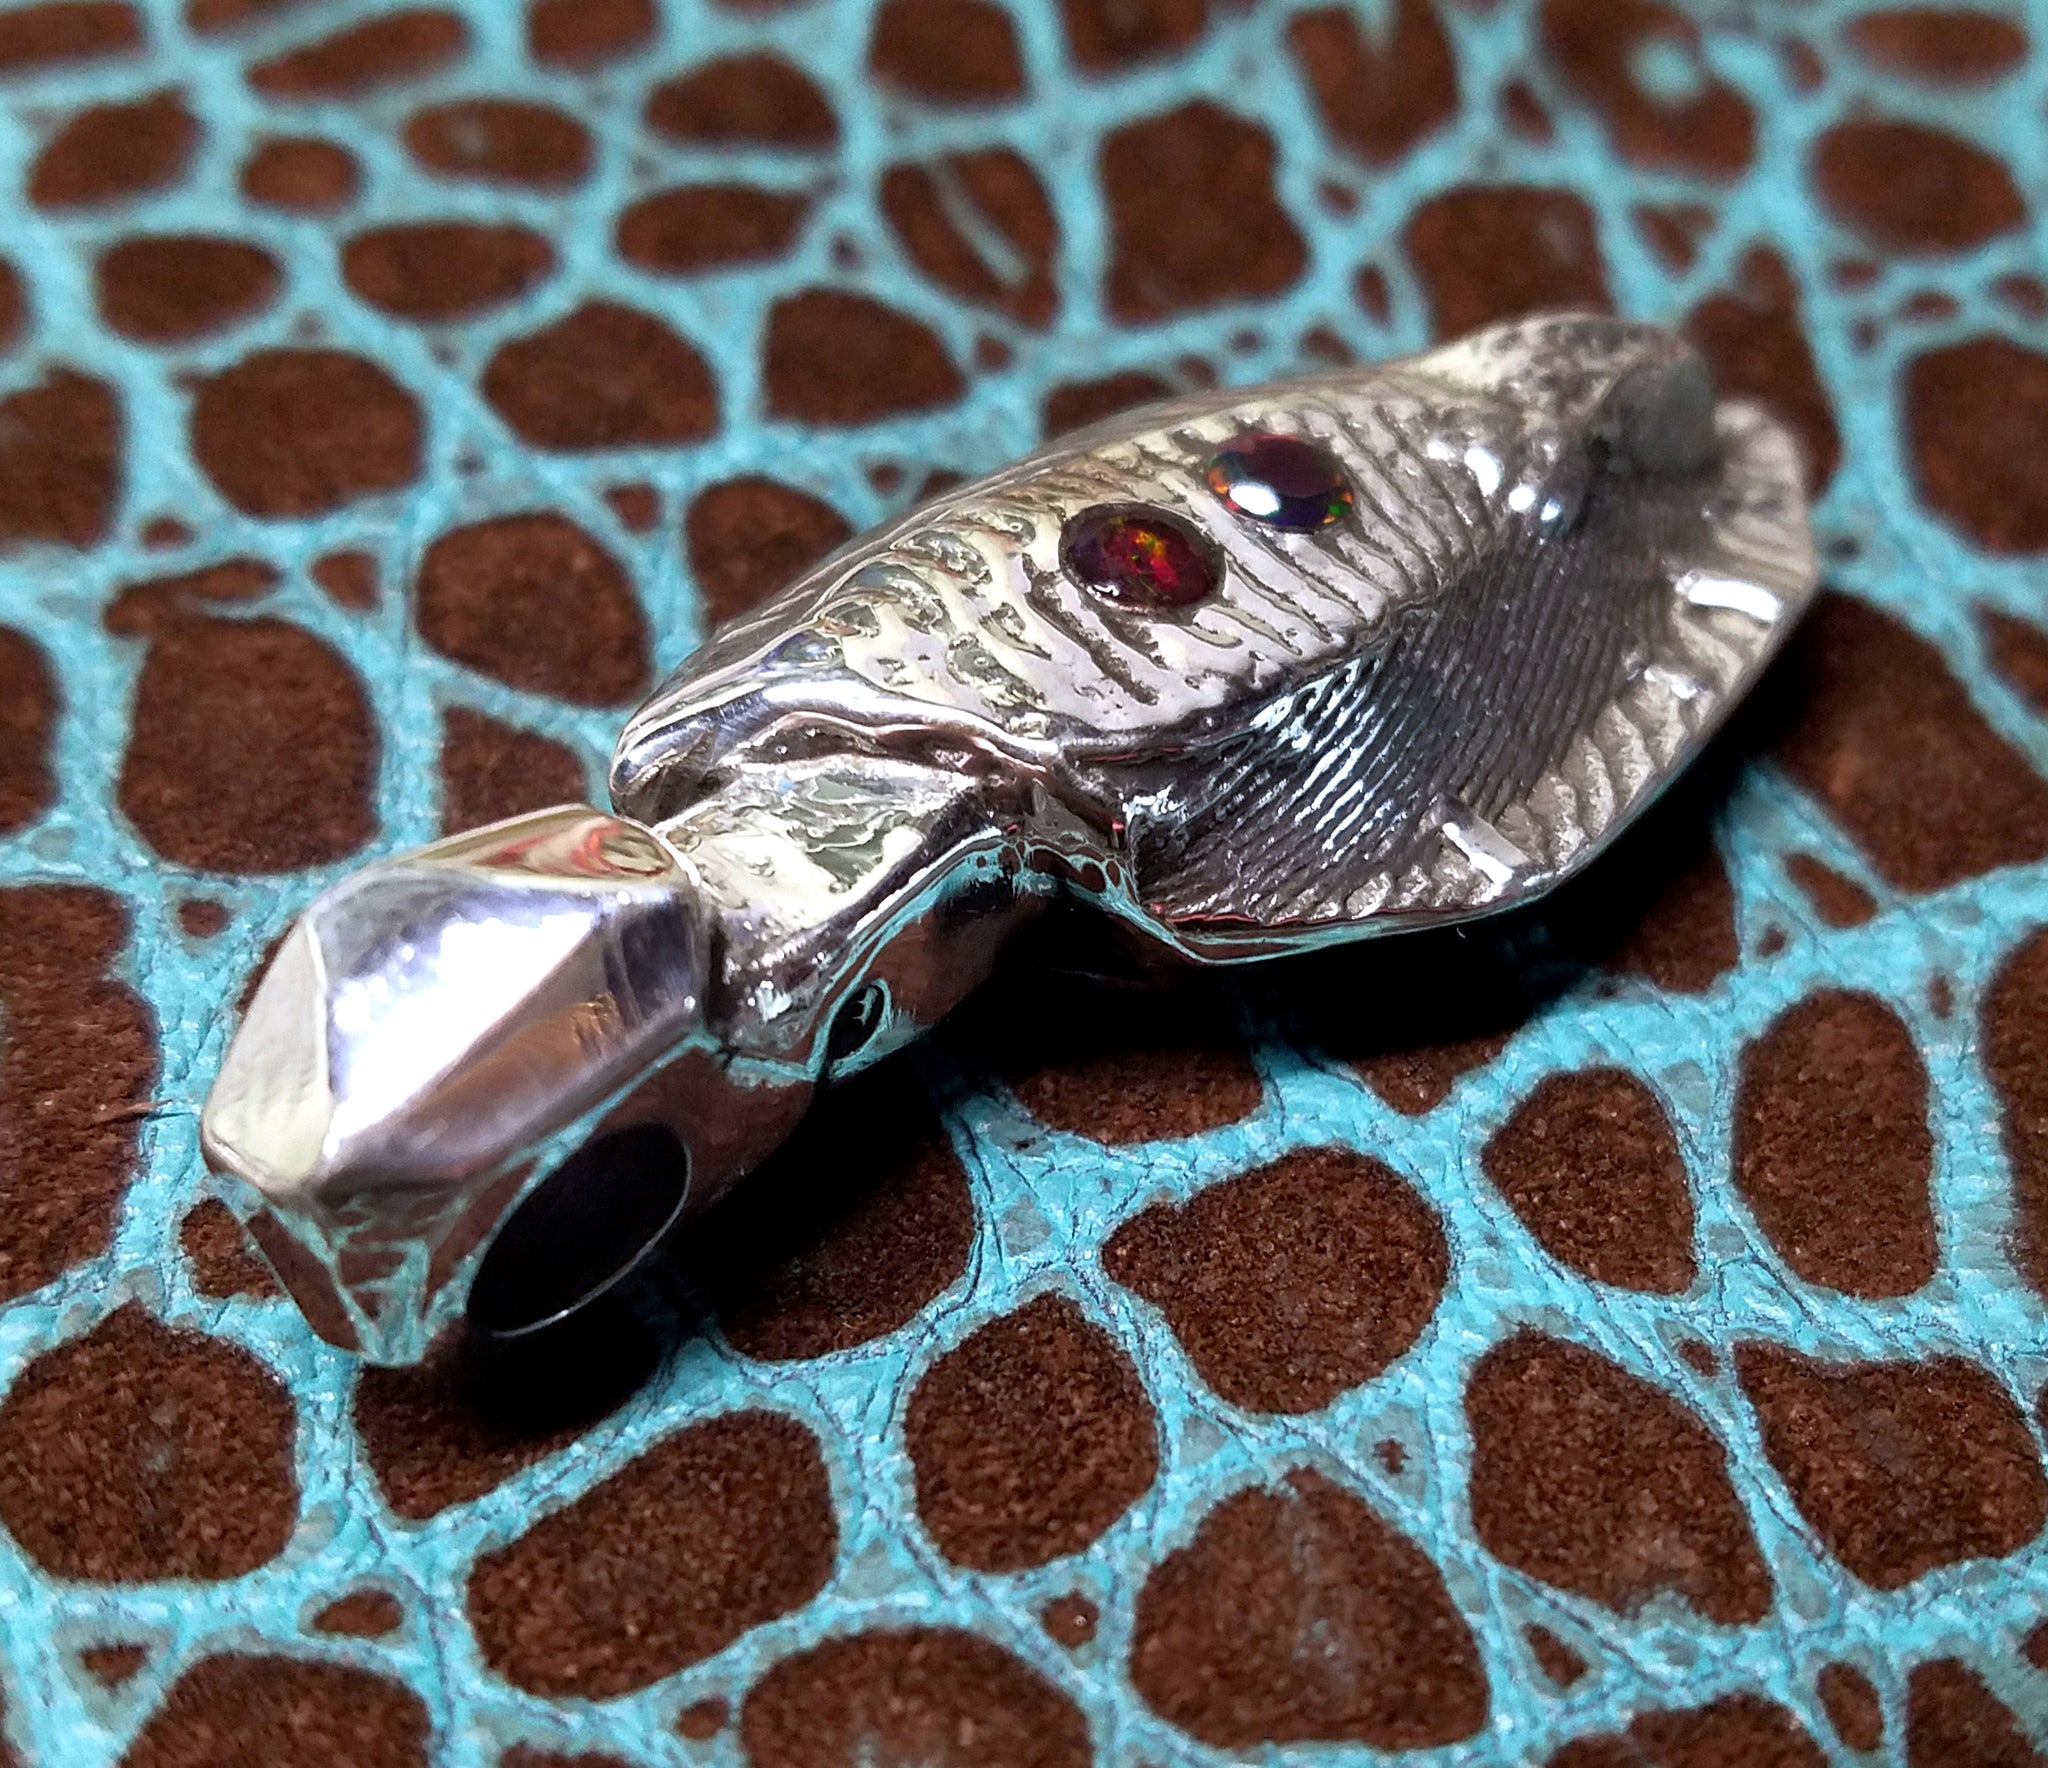 'Alien Seed' Hand-carved Hand-poured Cuttlefish Pendant #1 by Phantom